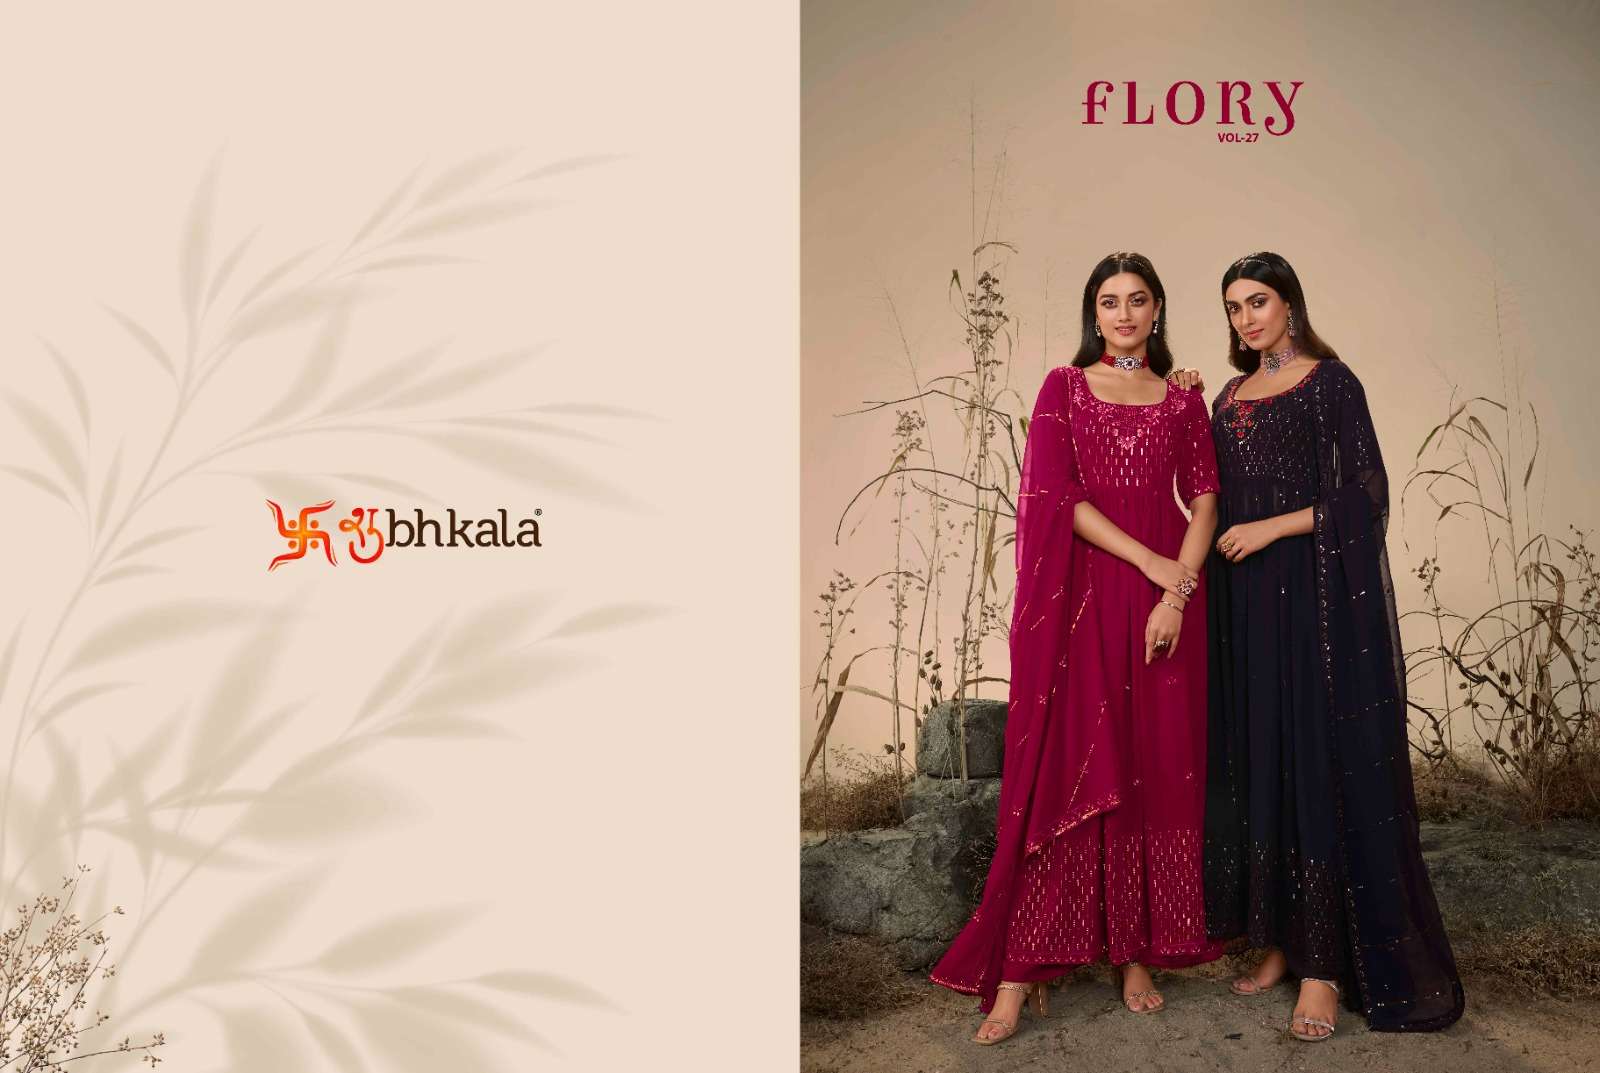 Shubhkala flory vol 27 new exclusive stitched designer salwar suit collection